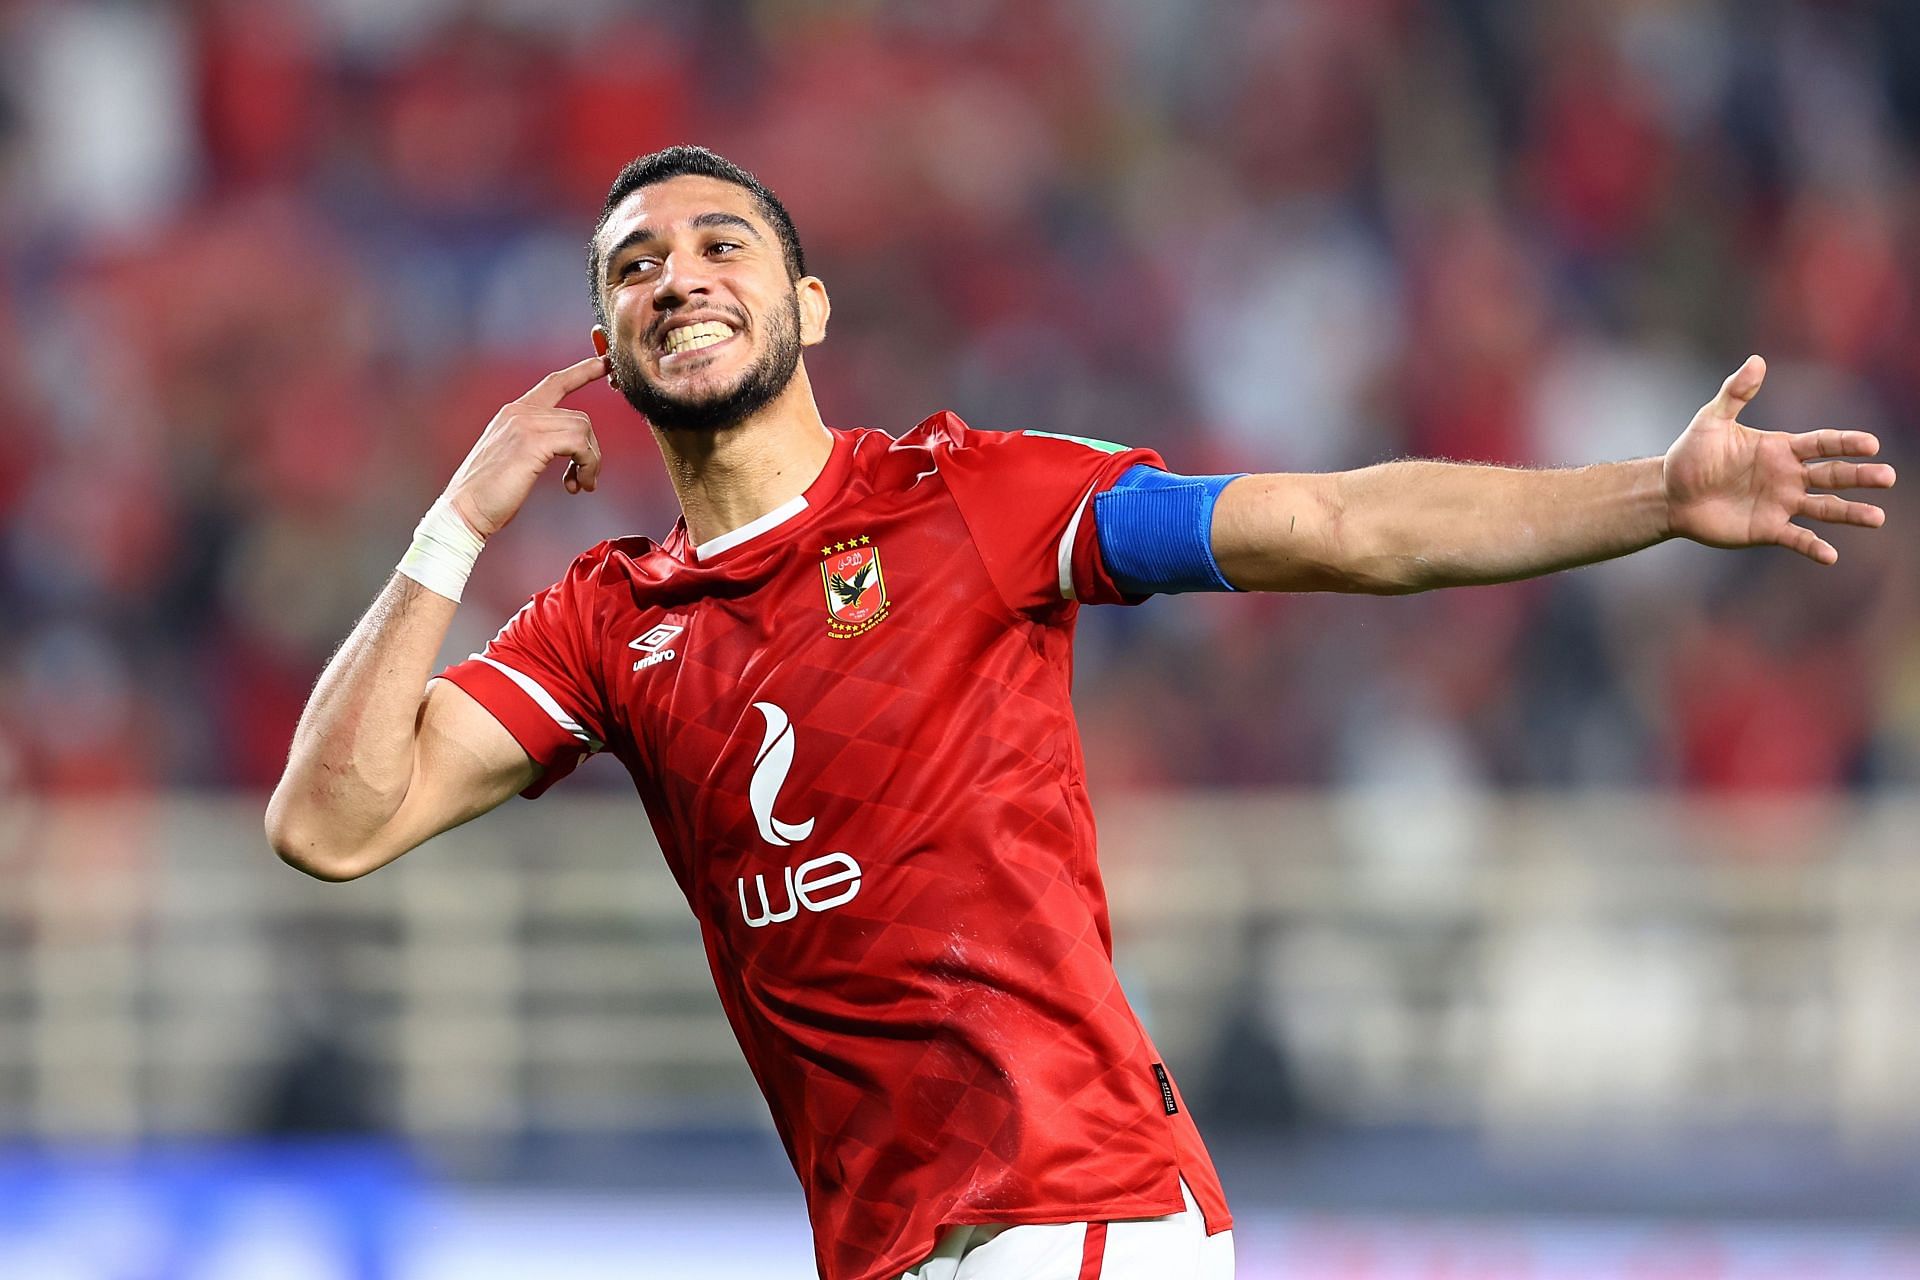 Al Ahly face ES Setif in the second leg semi-final fixture of the CAF Champions League on Saturday